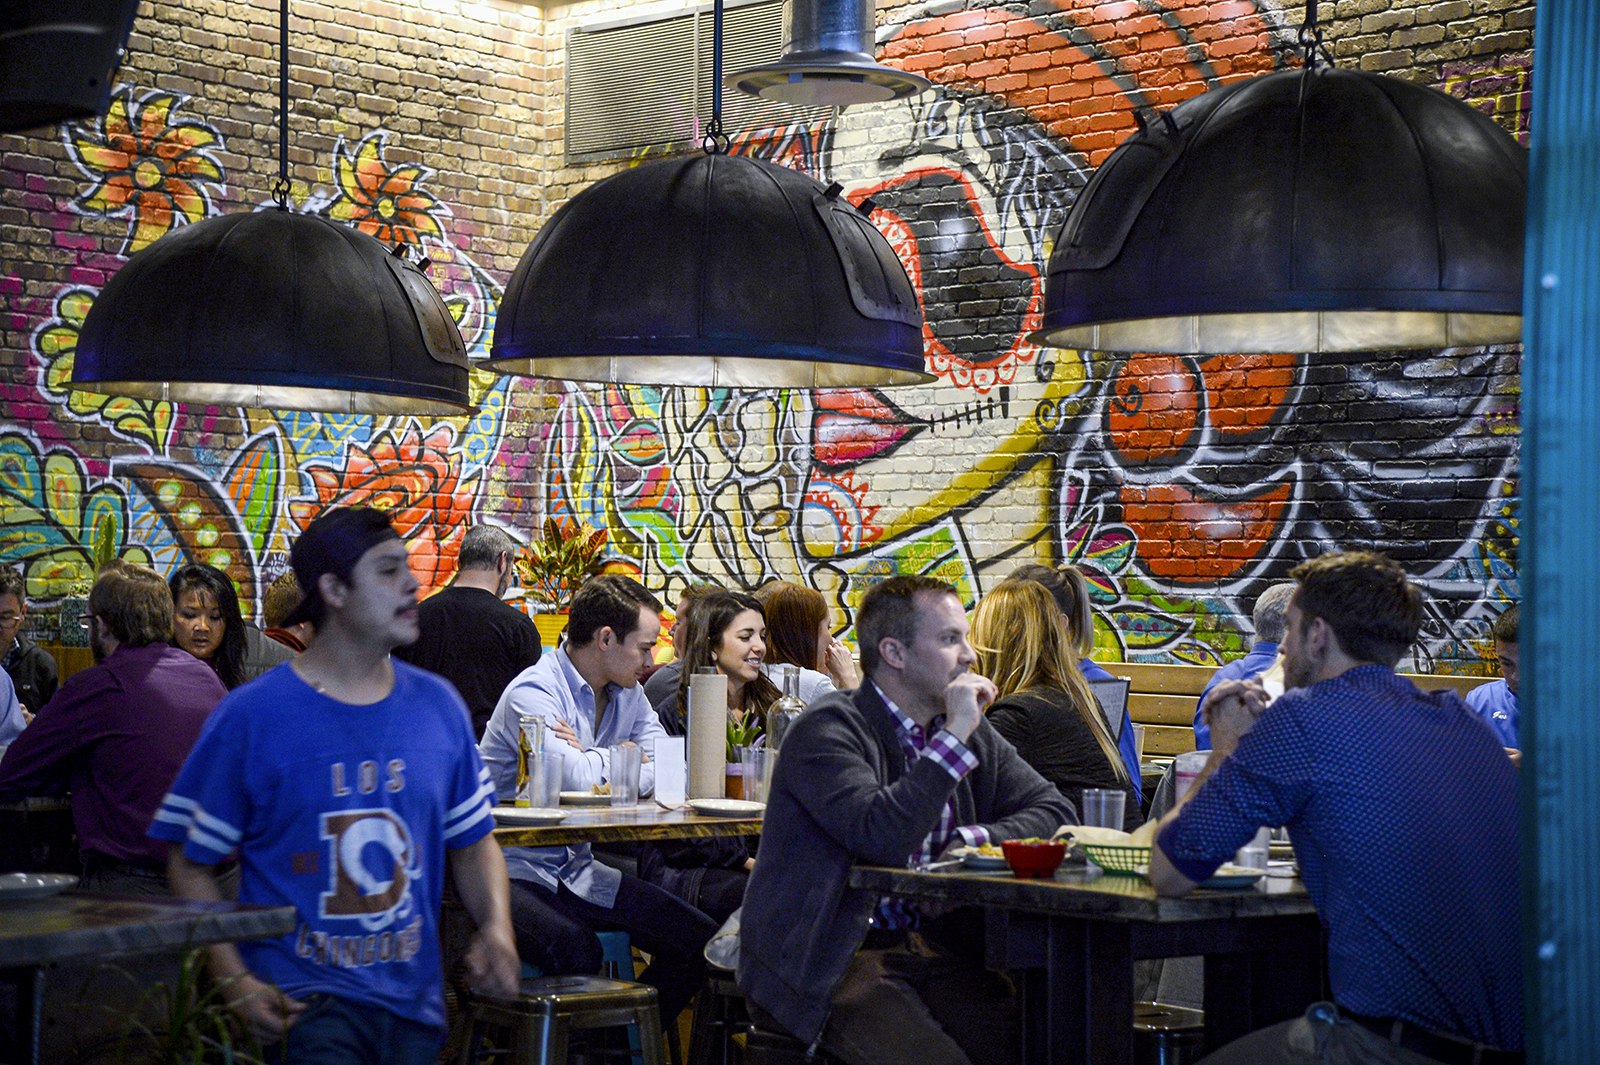 People enjoy tacos at tables beneath three umbrella-shaped lamps. The wall is brick and painted with a brightly colored mural depicted a person wearing sugar skull makeup. Denver, Colorado.